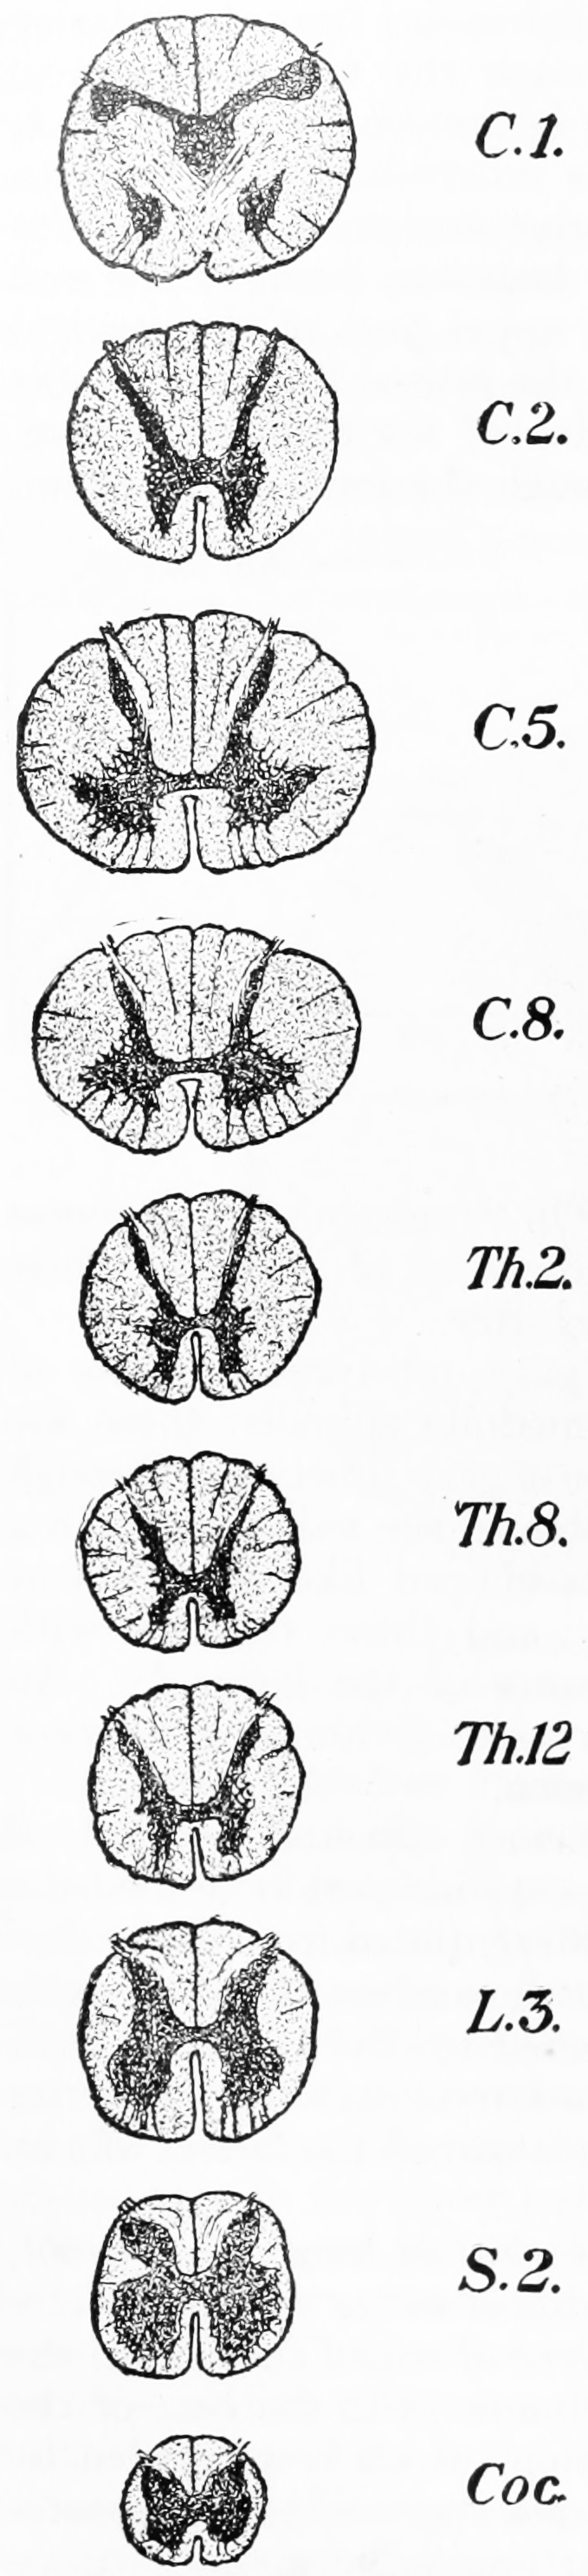 Transverse section of the spinal cord at different levels. From Gray Henry, Anatomy of the Human Body. 20th Edition, Lea & Febiger, Philadelphia & New York, 1918